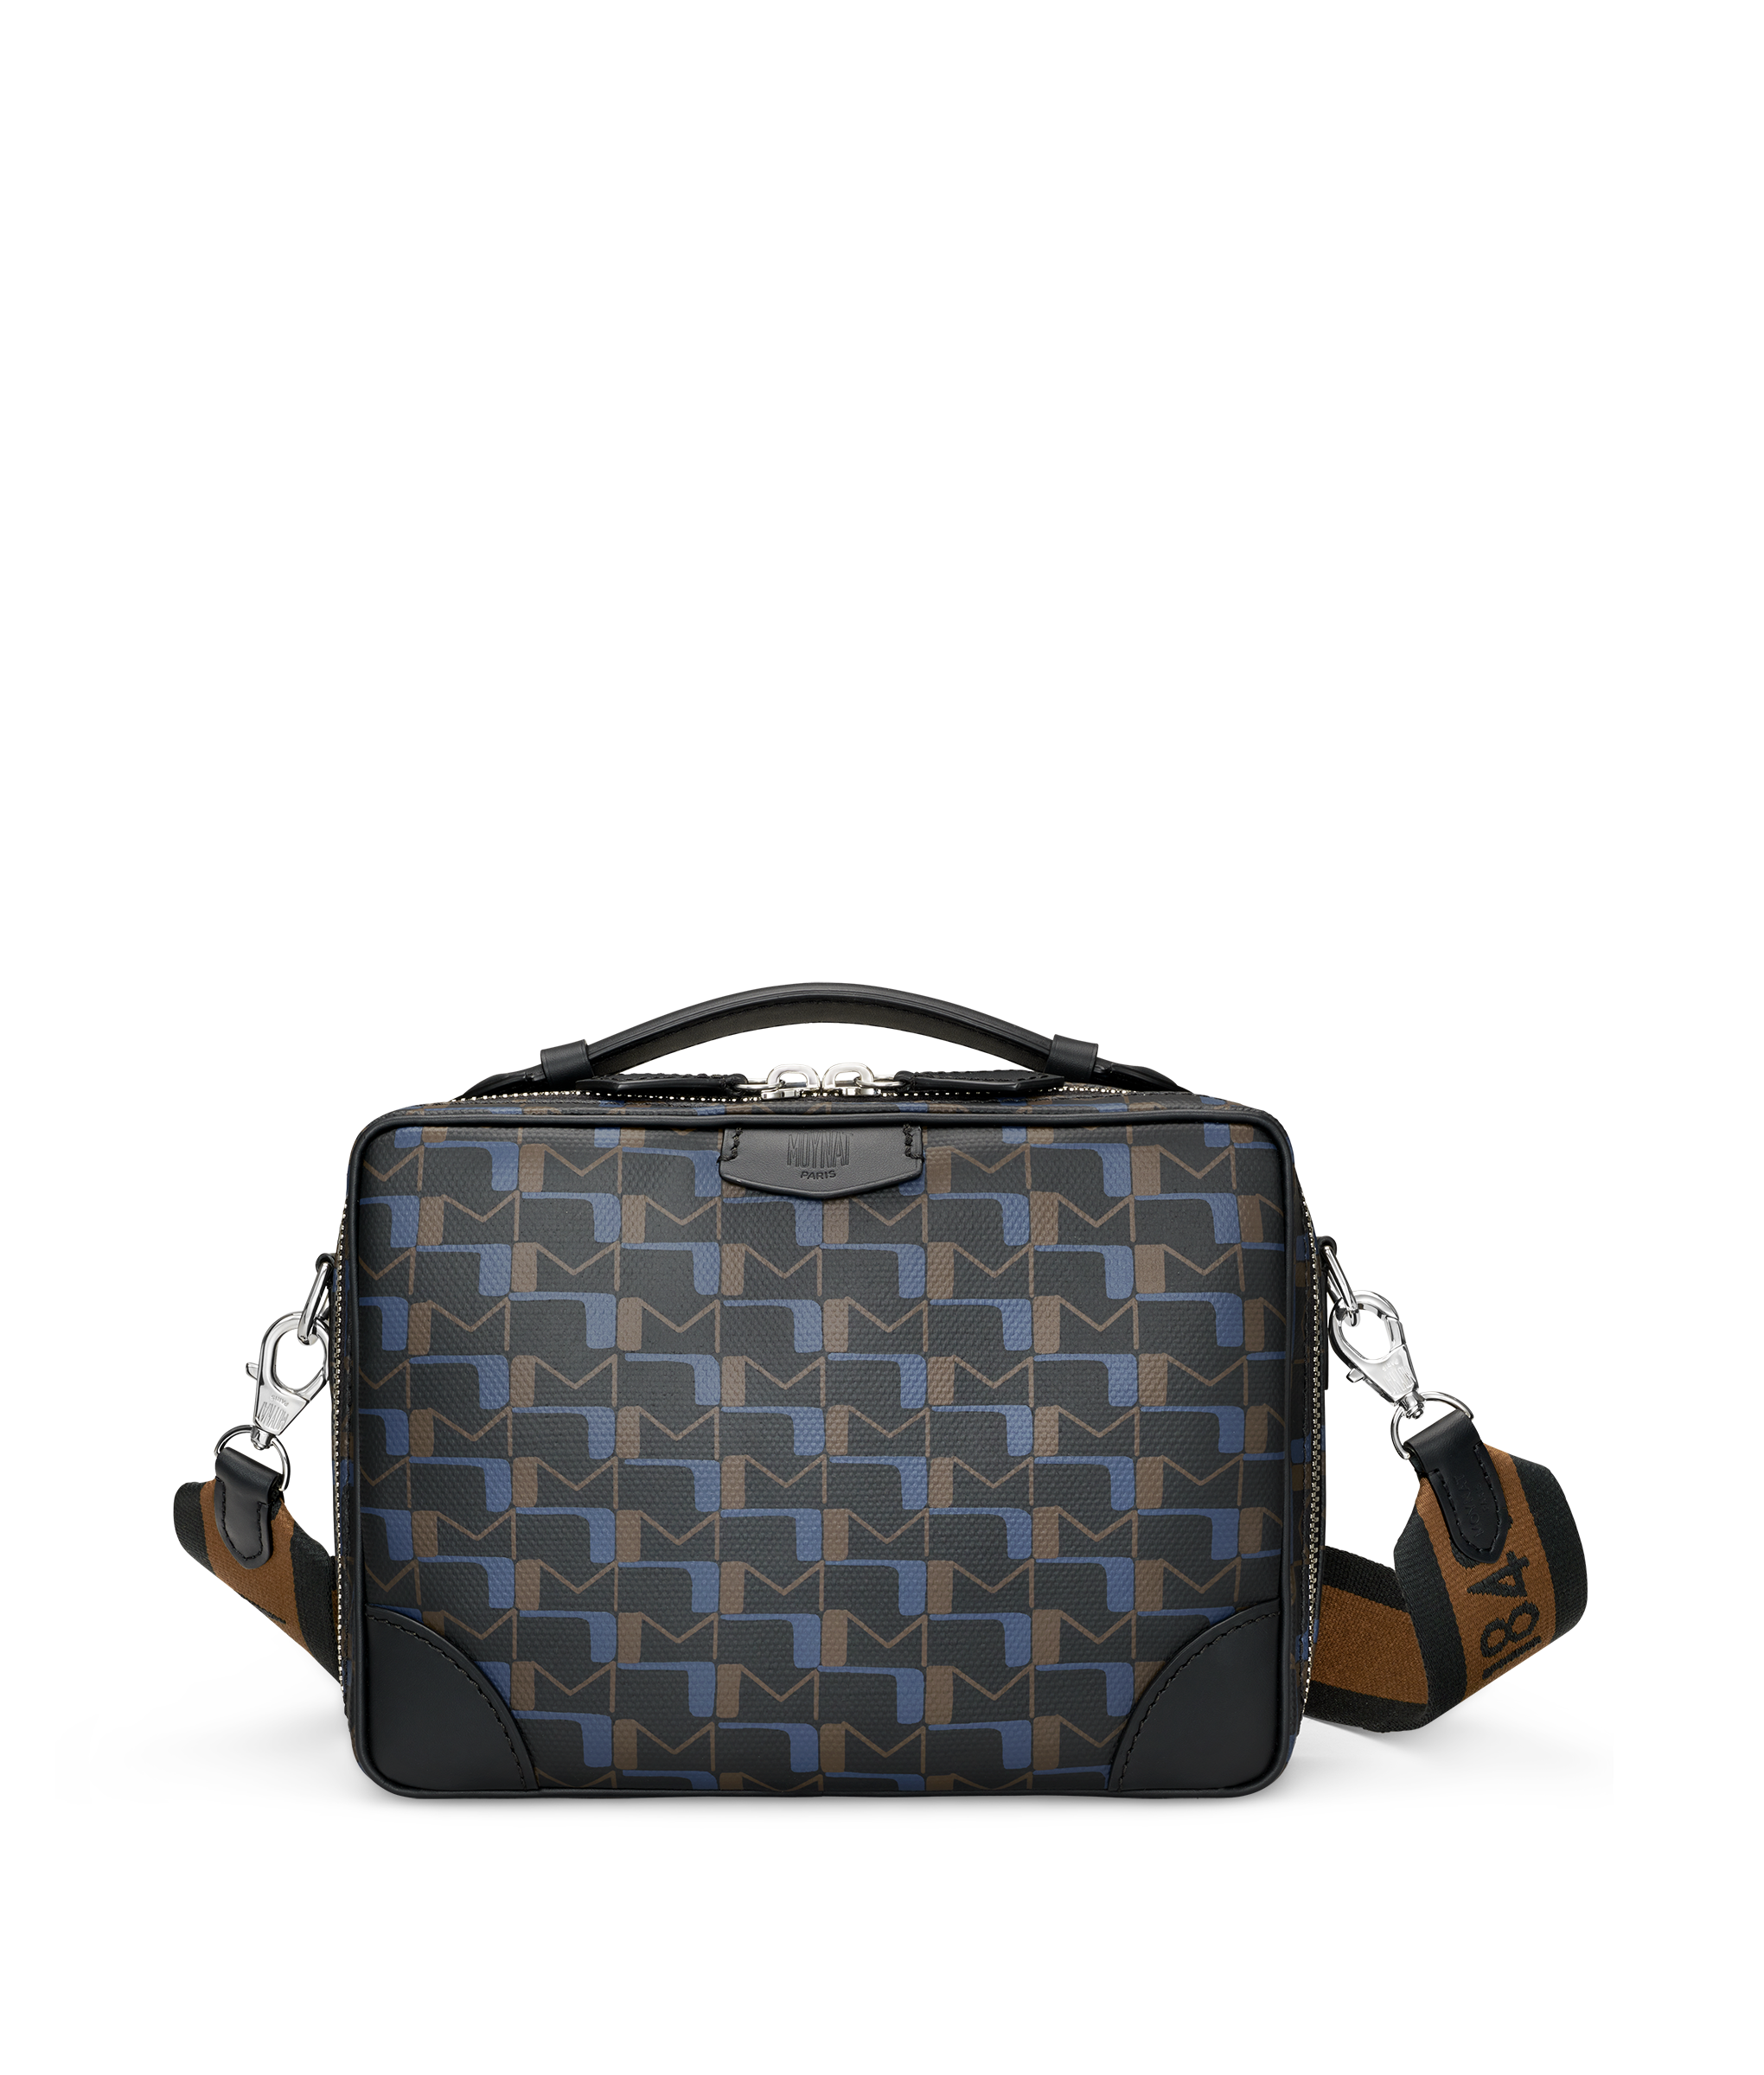 View 1 - Damier Graphite Canvas Personalization HOTSTAMPING